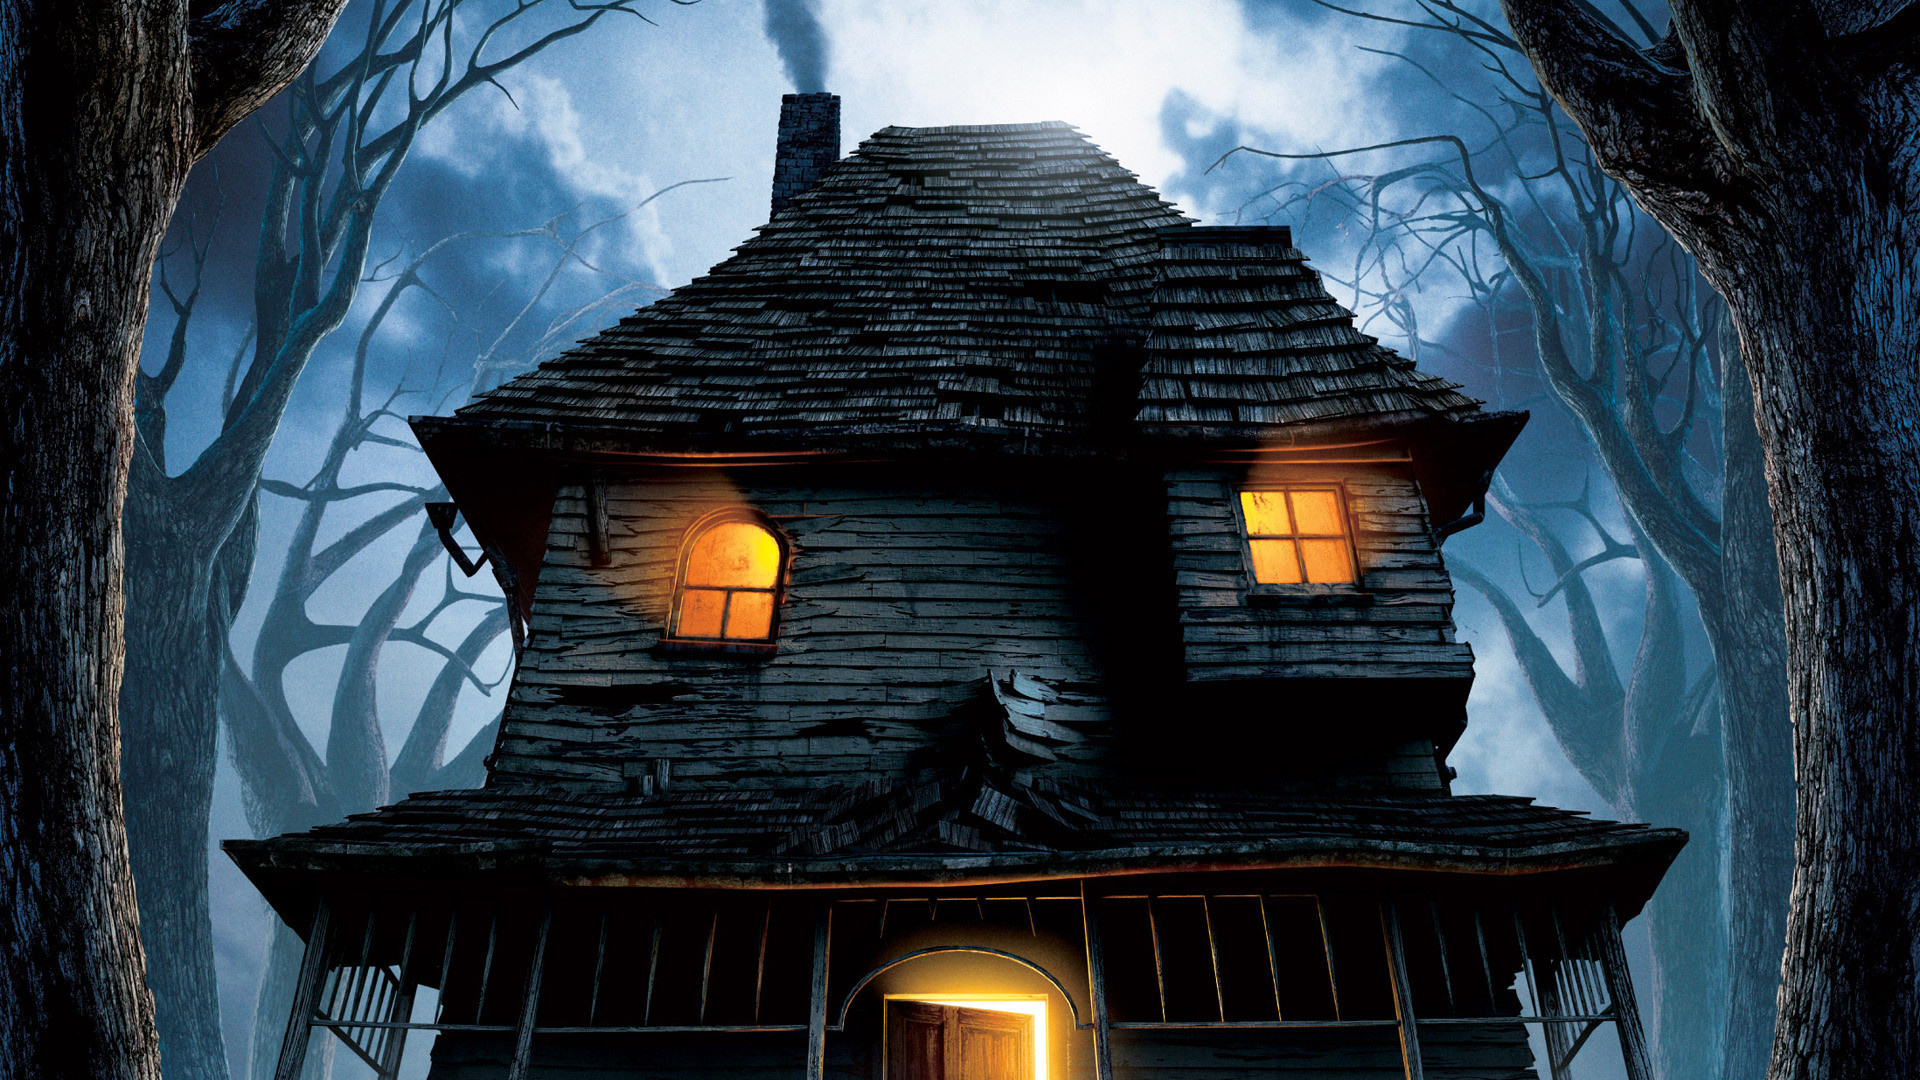 Monster House, HD movie, Animated treasure, Colorful and exciting, 1920x1080 Full HD Desktop